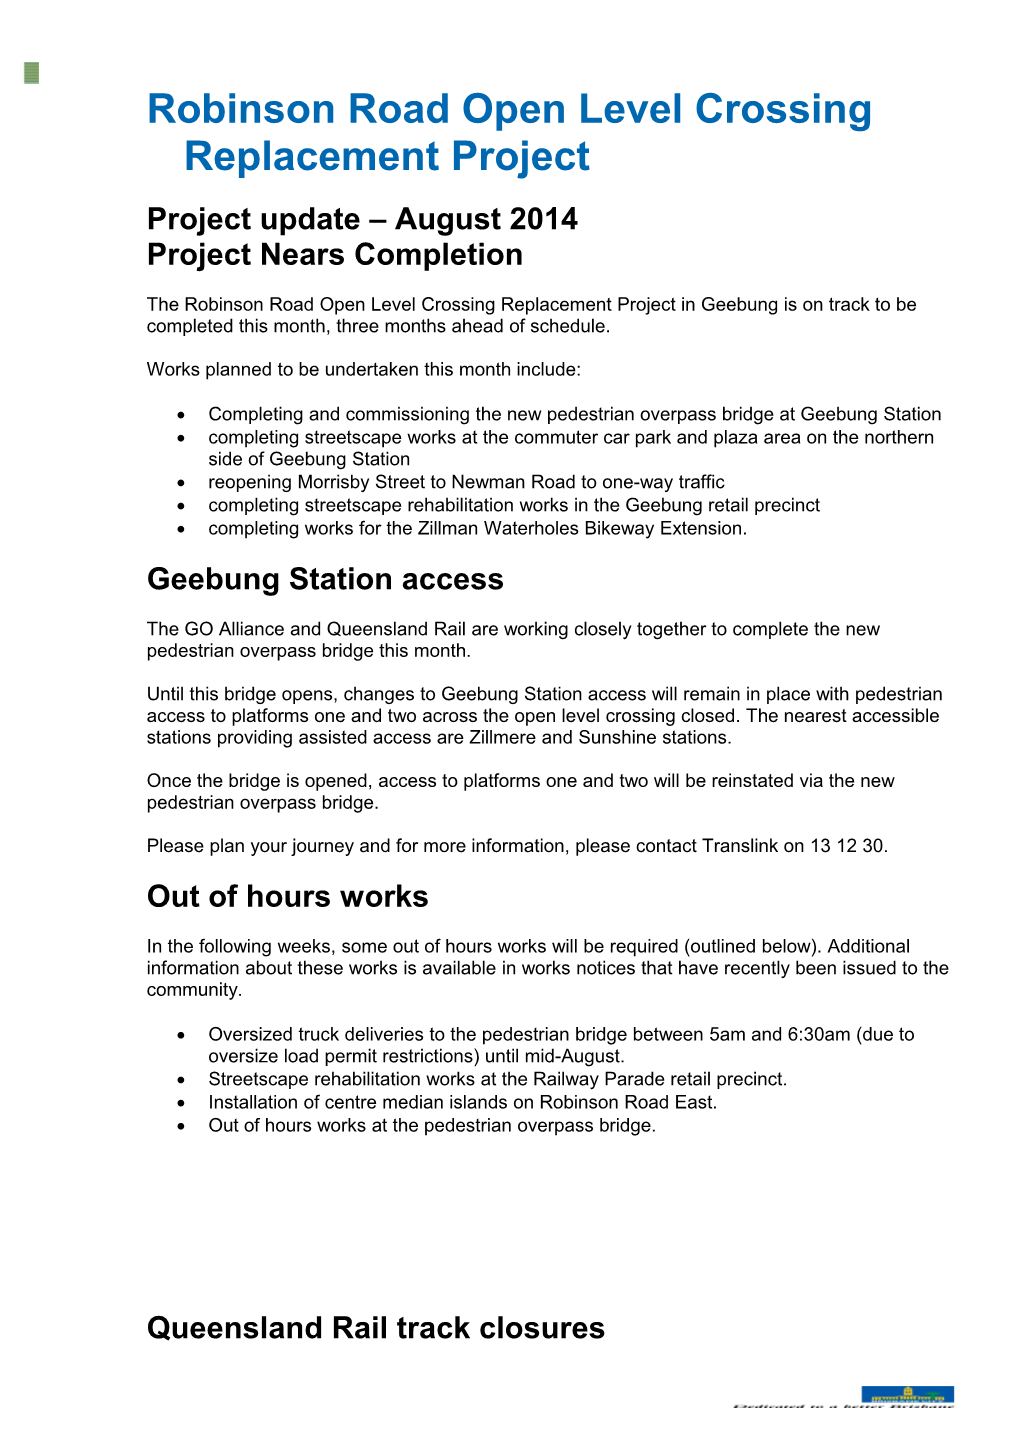 Robinson Road Open Level Crossing Replacement Project